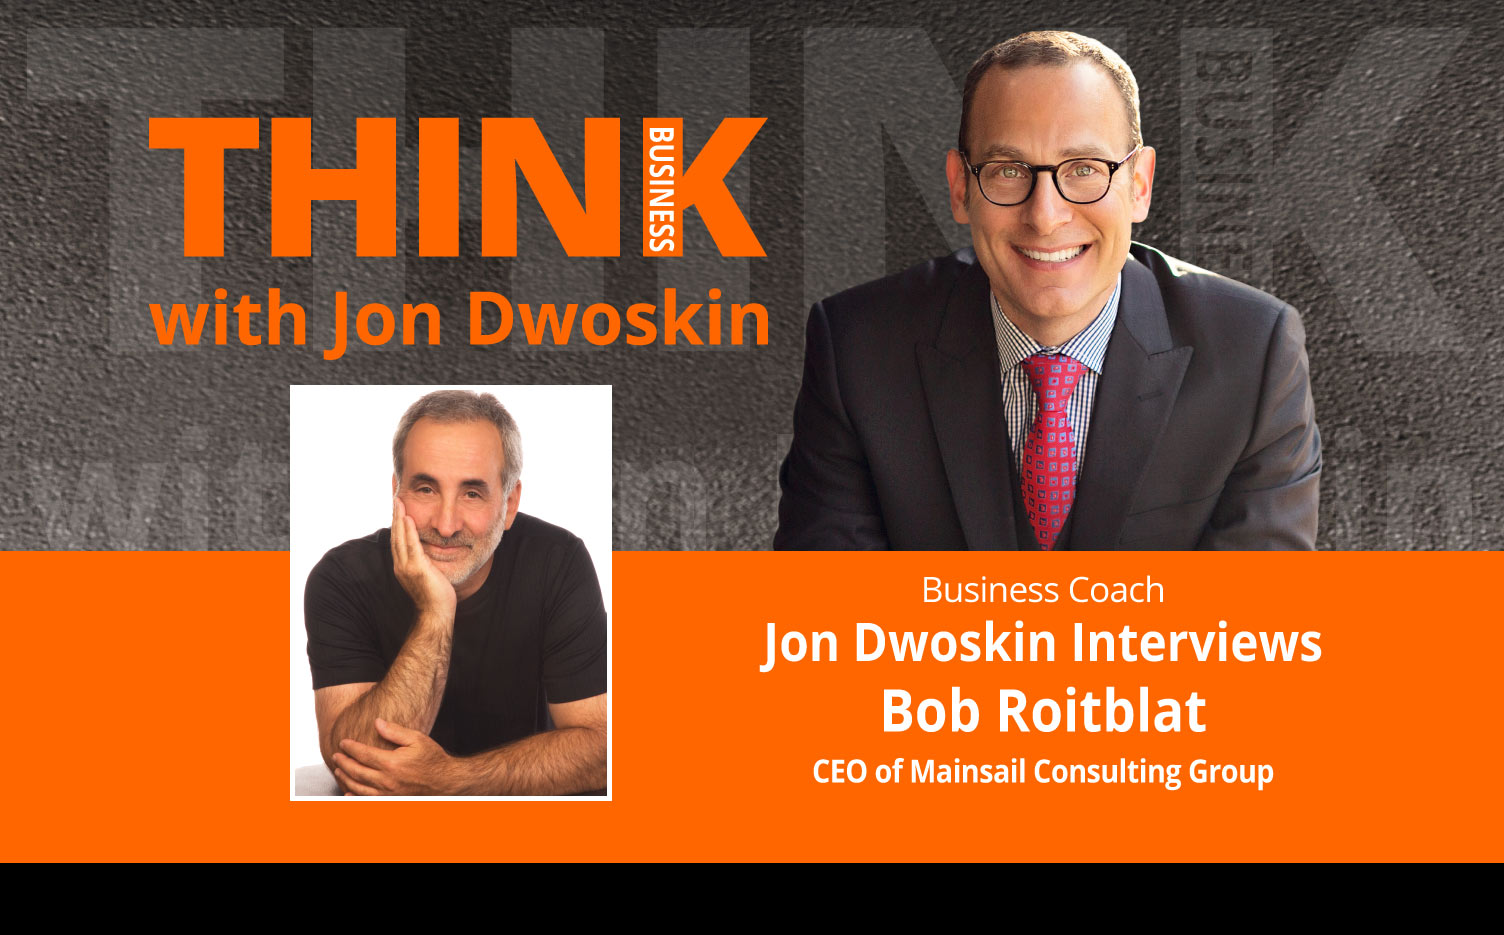 THINK Business Podcast: Jon Dwoskin Interviews Bob Roitblat, CEO of Mainsail Consulting Group